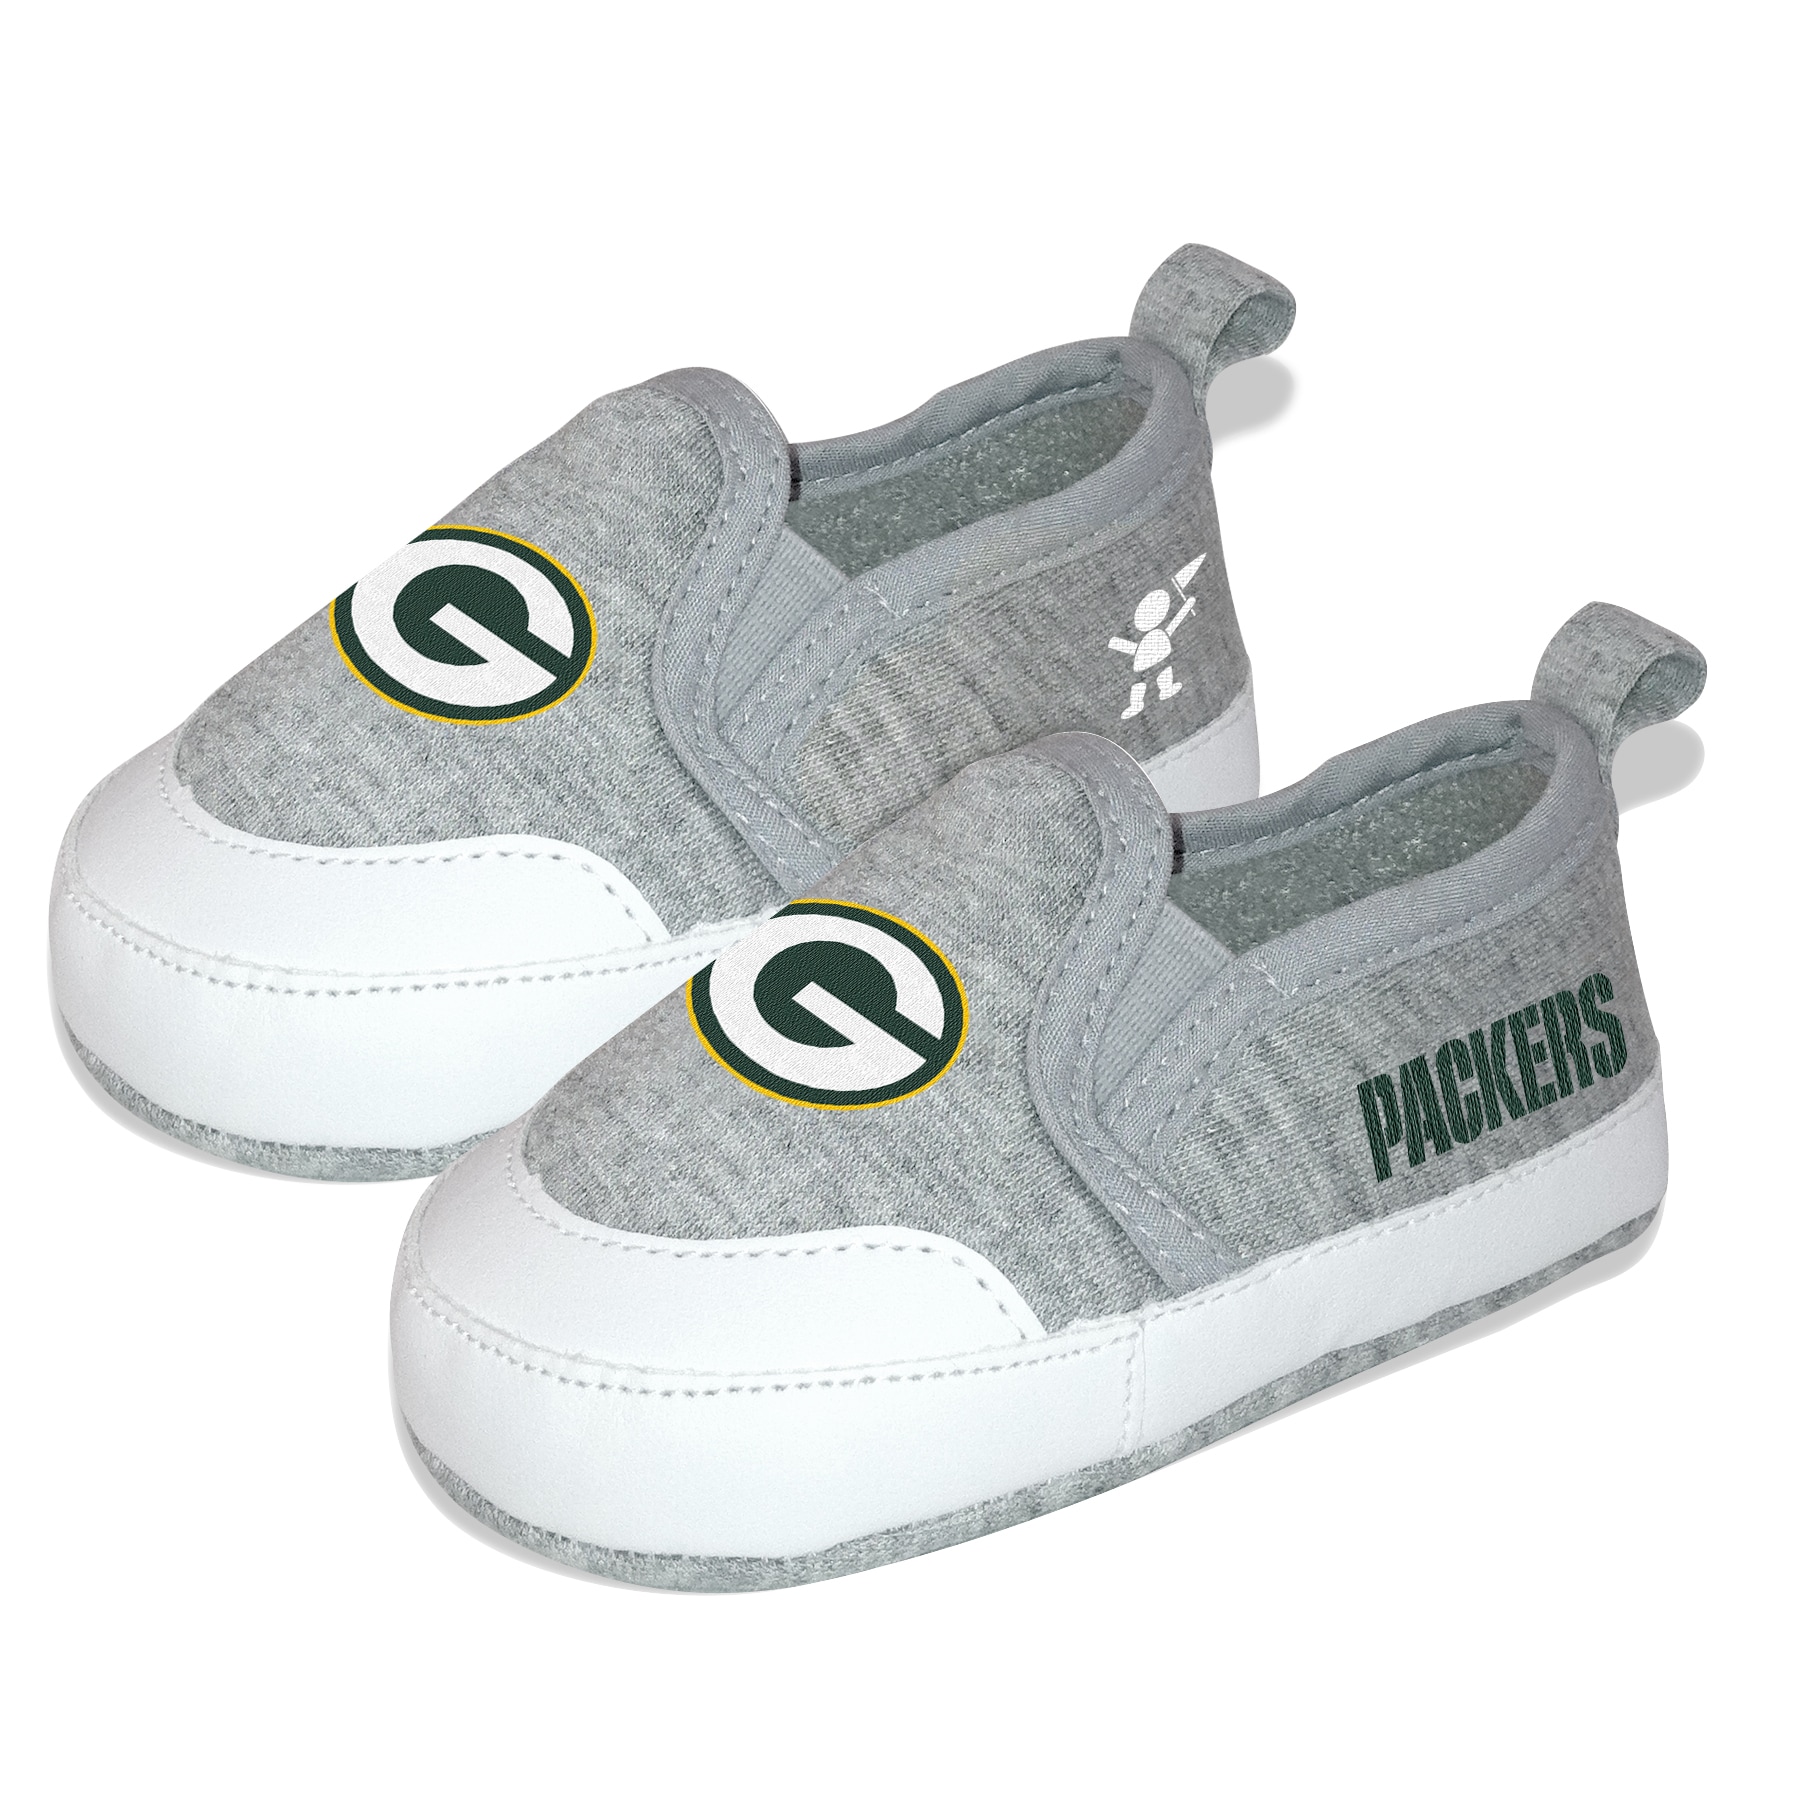 Green Bay Packers Pre-walk Baby Shoes - 14178572 - Overstock.com ...